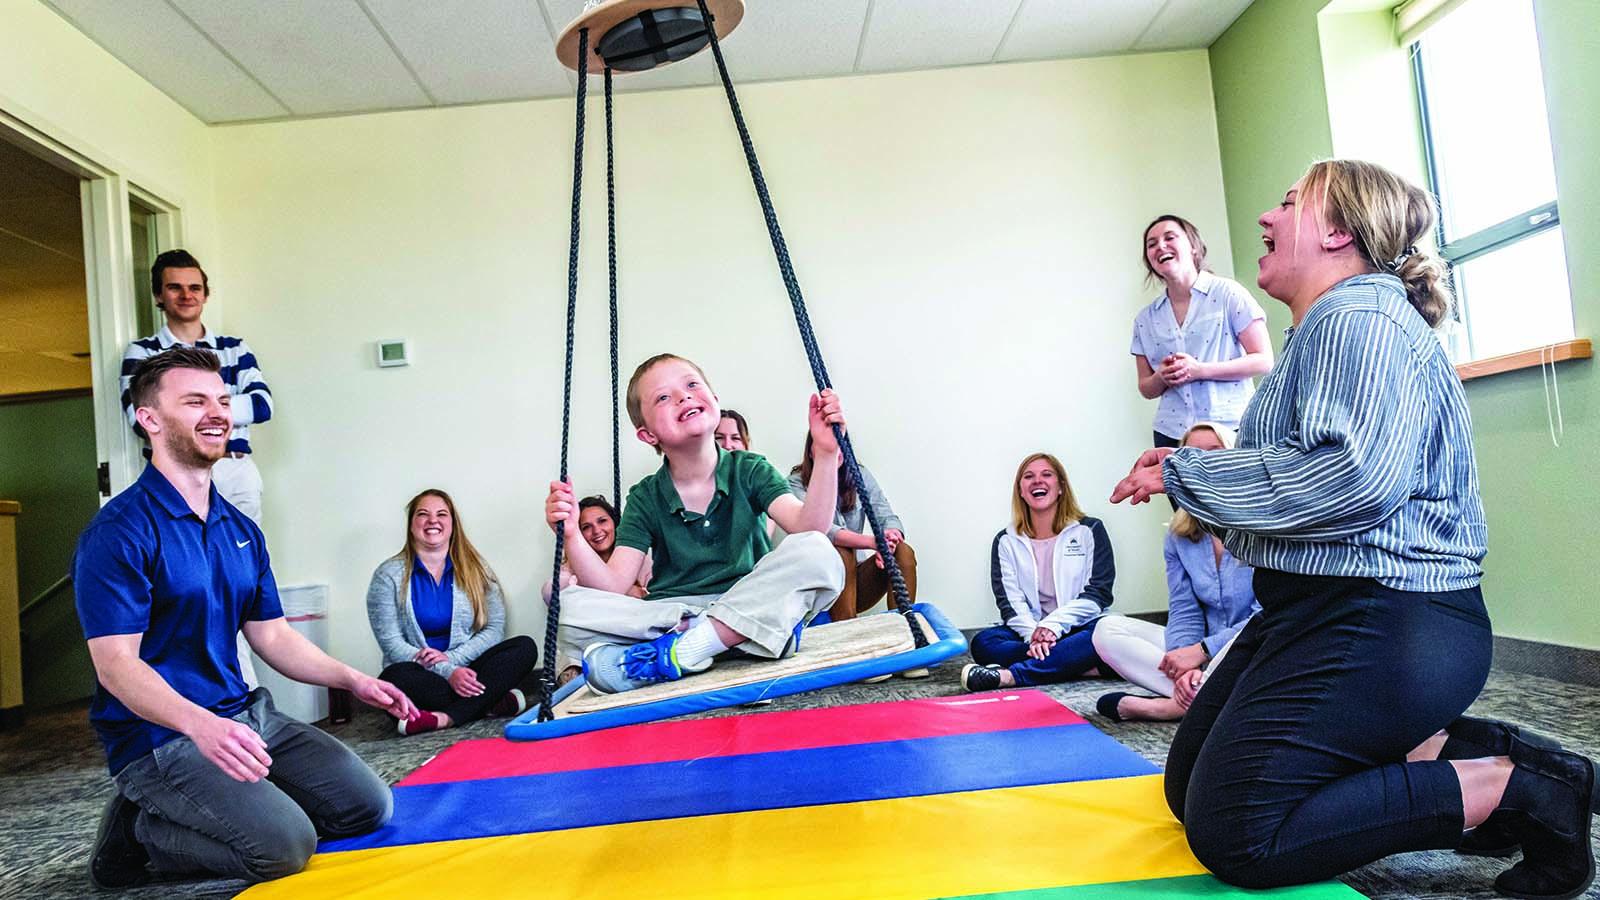 Several smiling occupational therapy students meeting with a child client who is swinging above a multi-colored mat